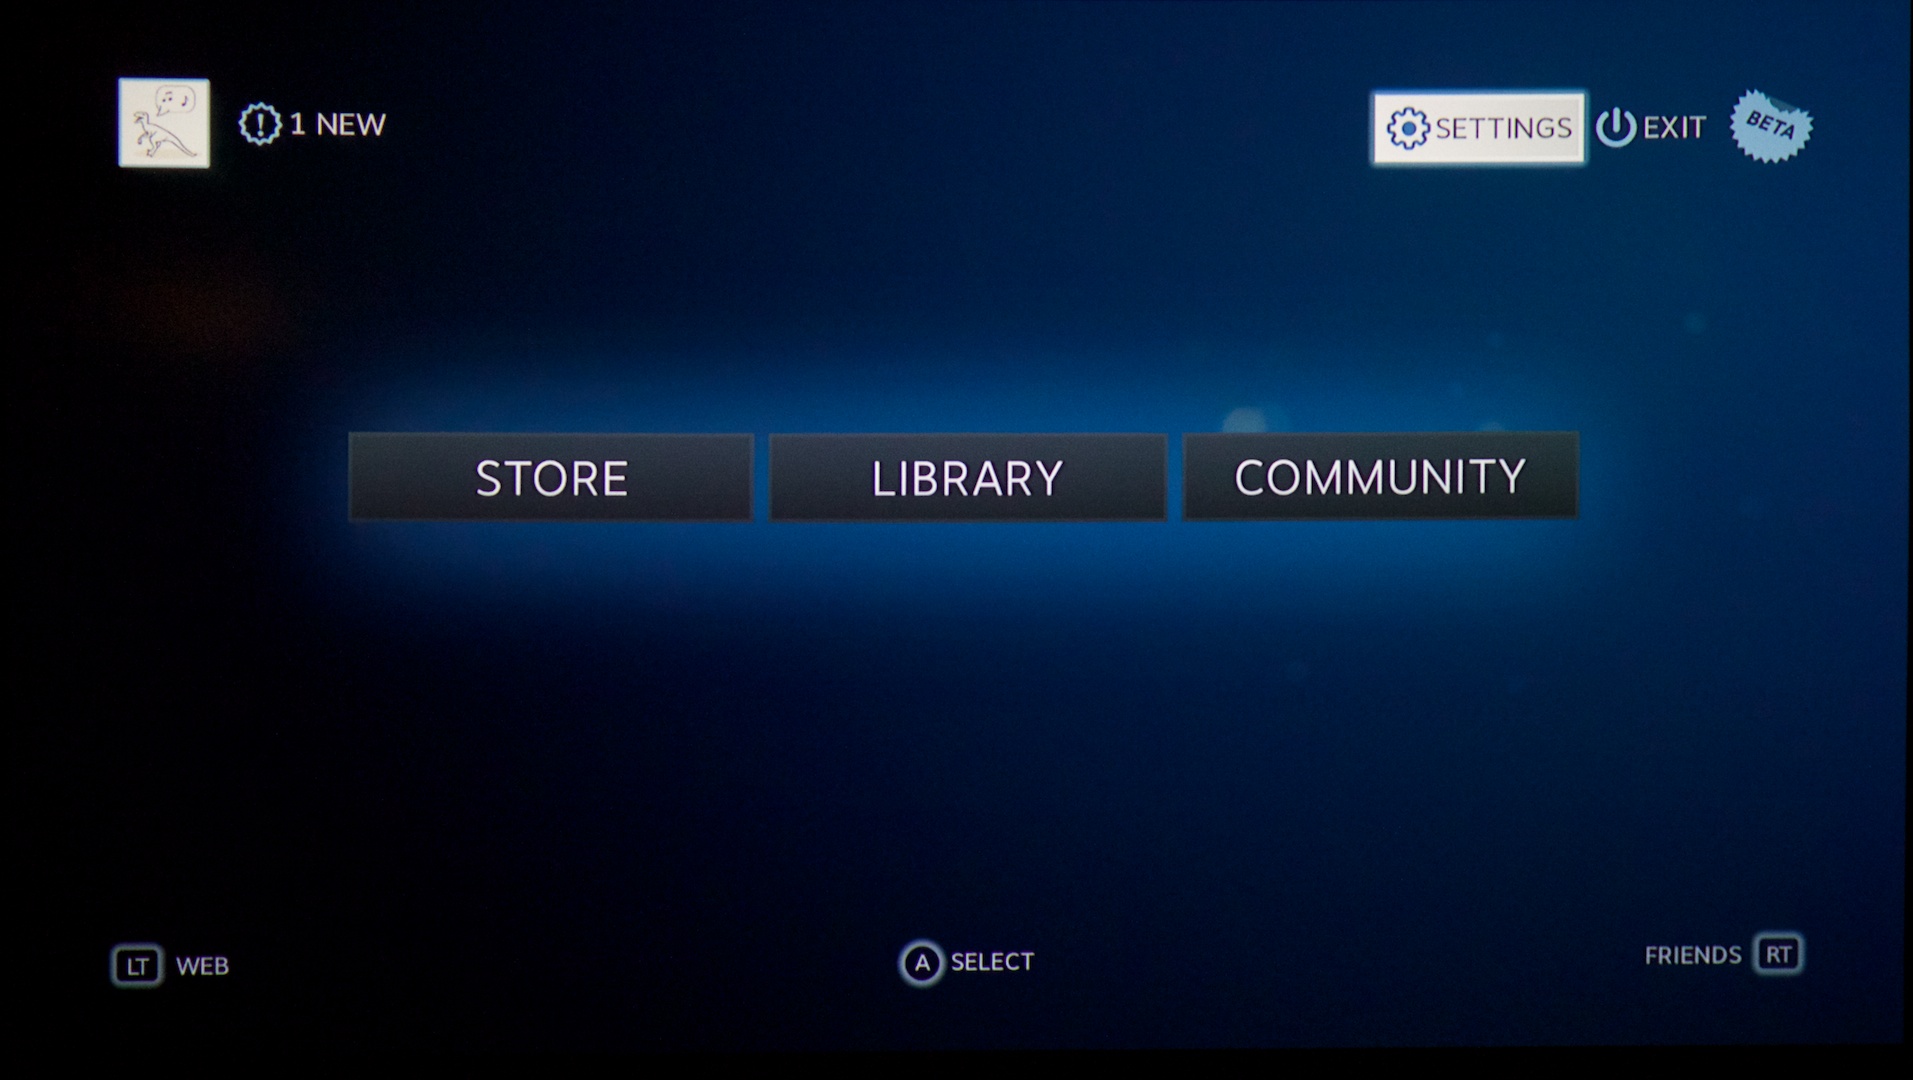 How to Install SteamOS 3 on Your Linux PC